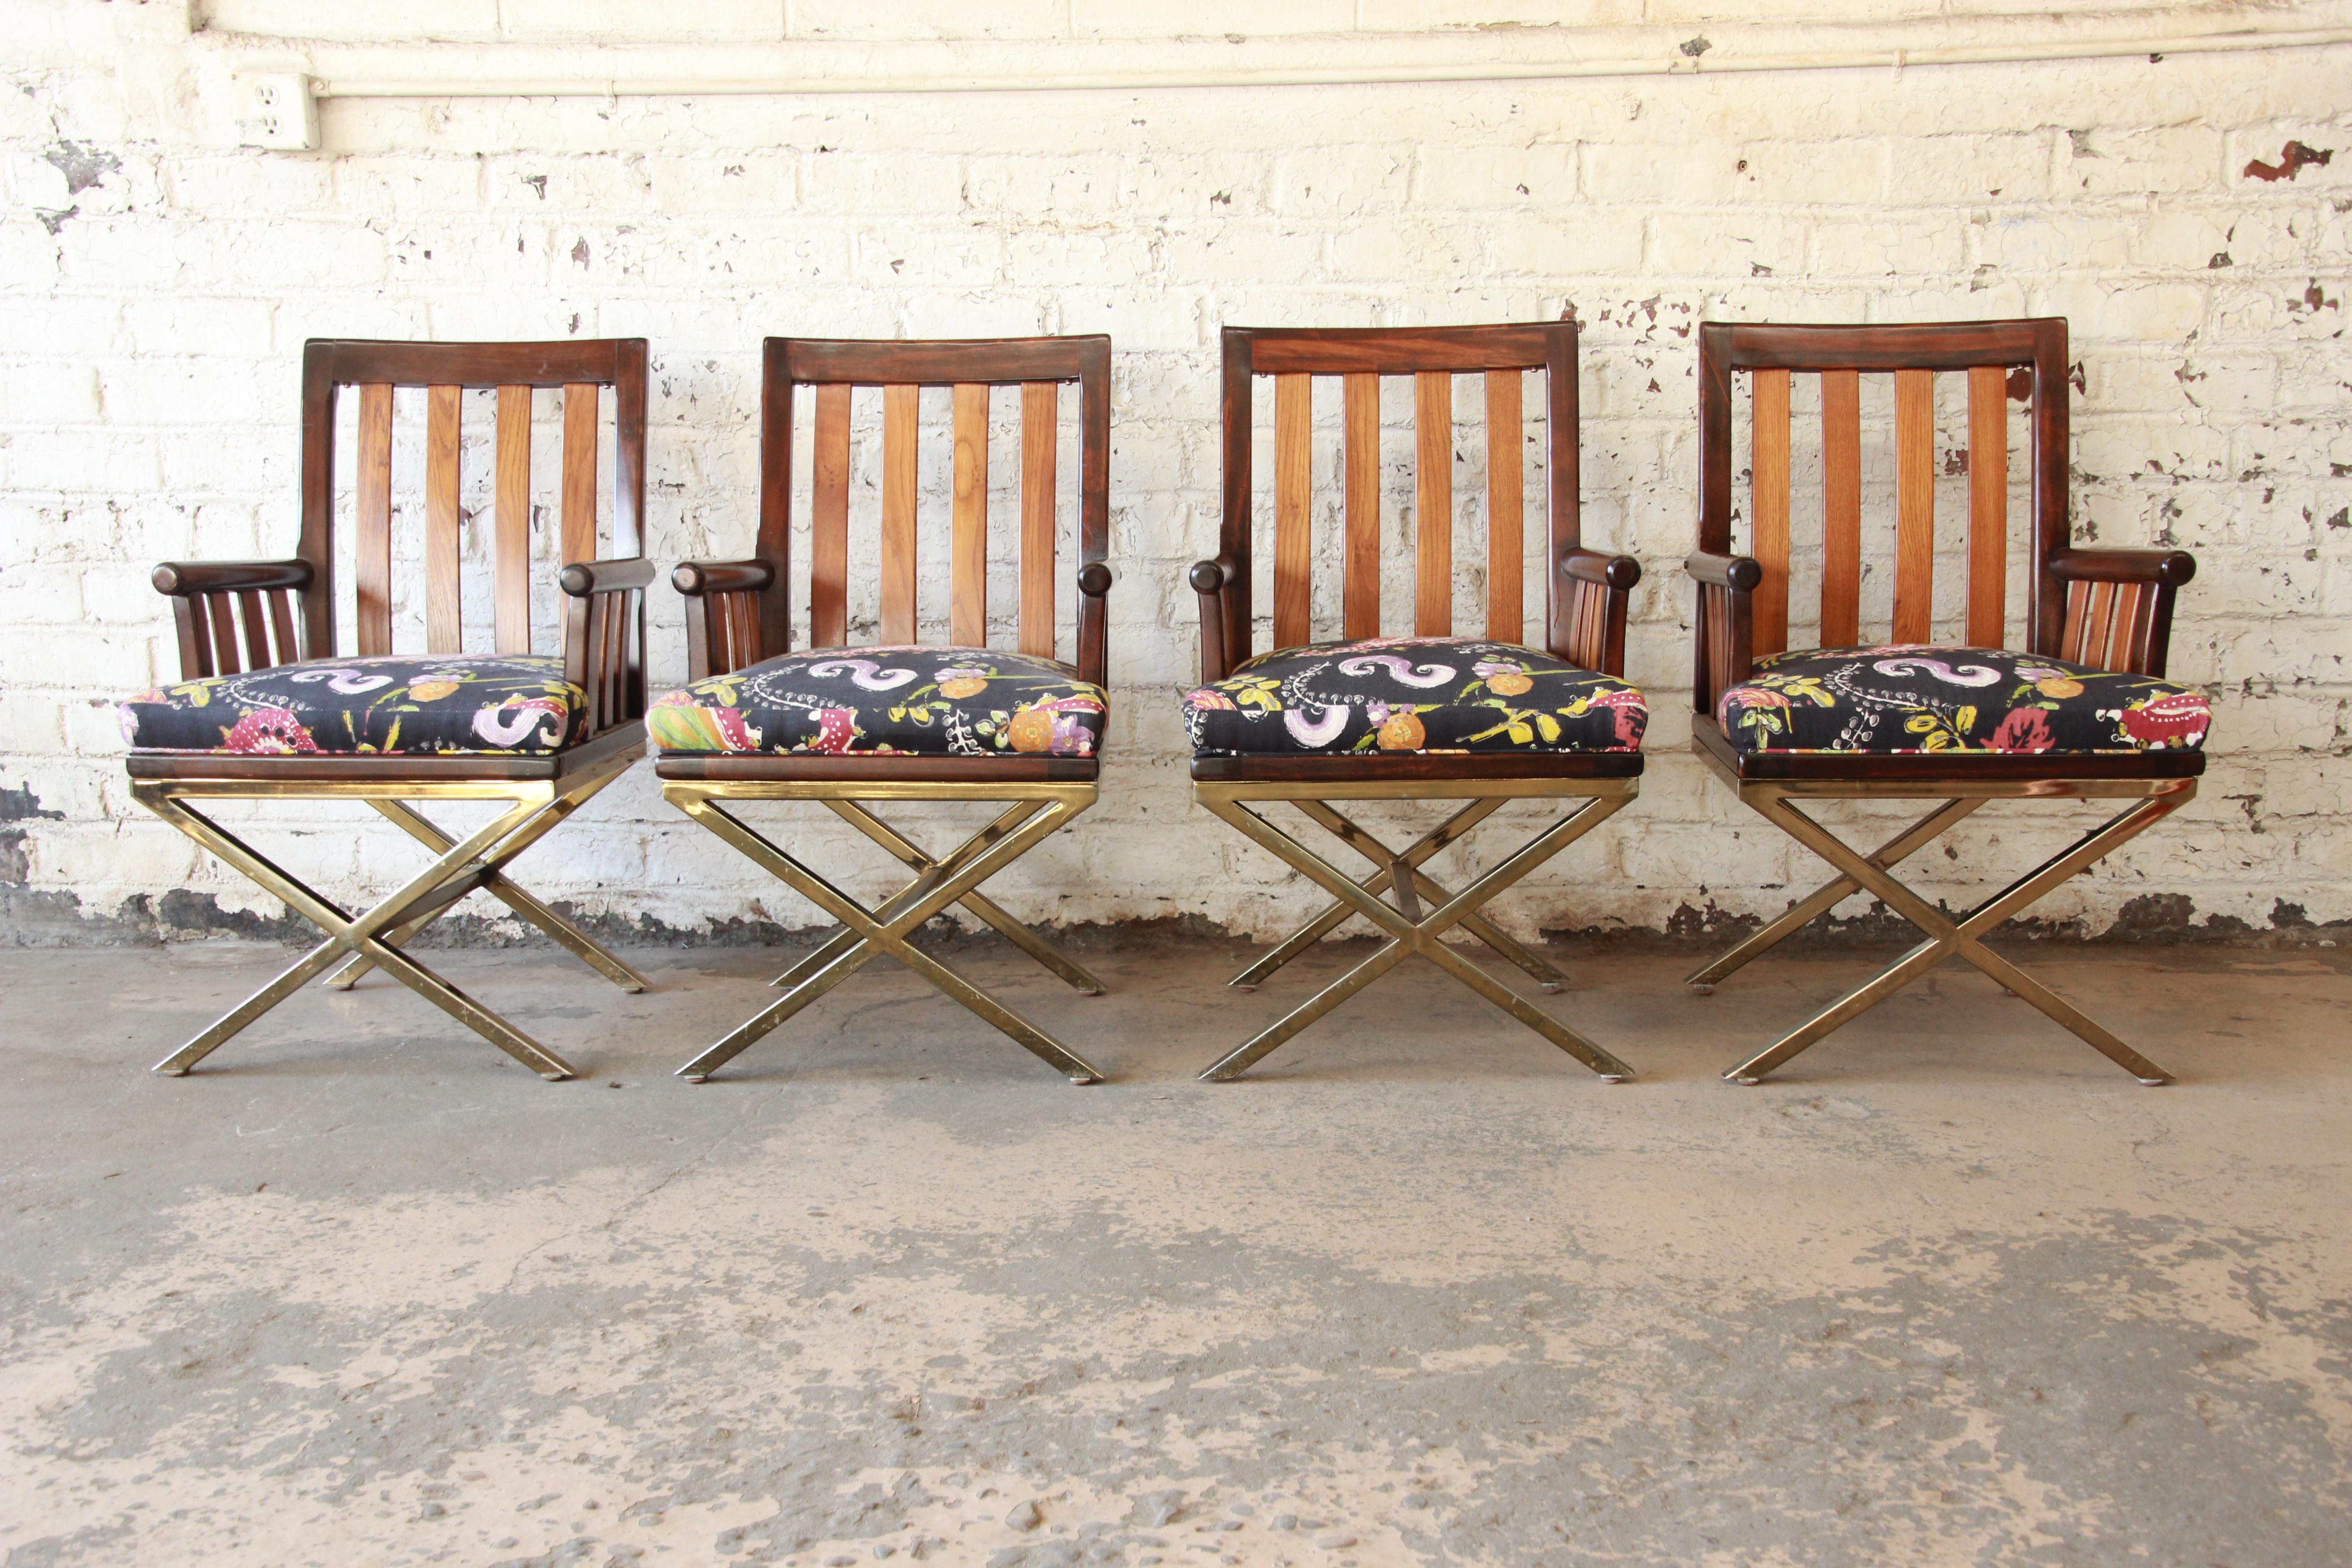 A unique set of four Mid-Century Modern armchairs. The chairs feature solid wood slatted backs and arms and a heavy brass X-base design. They have a colorful paisley upholstery which is clean and usable as is but could also easily be reupholstered.